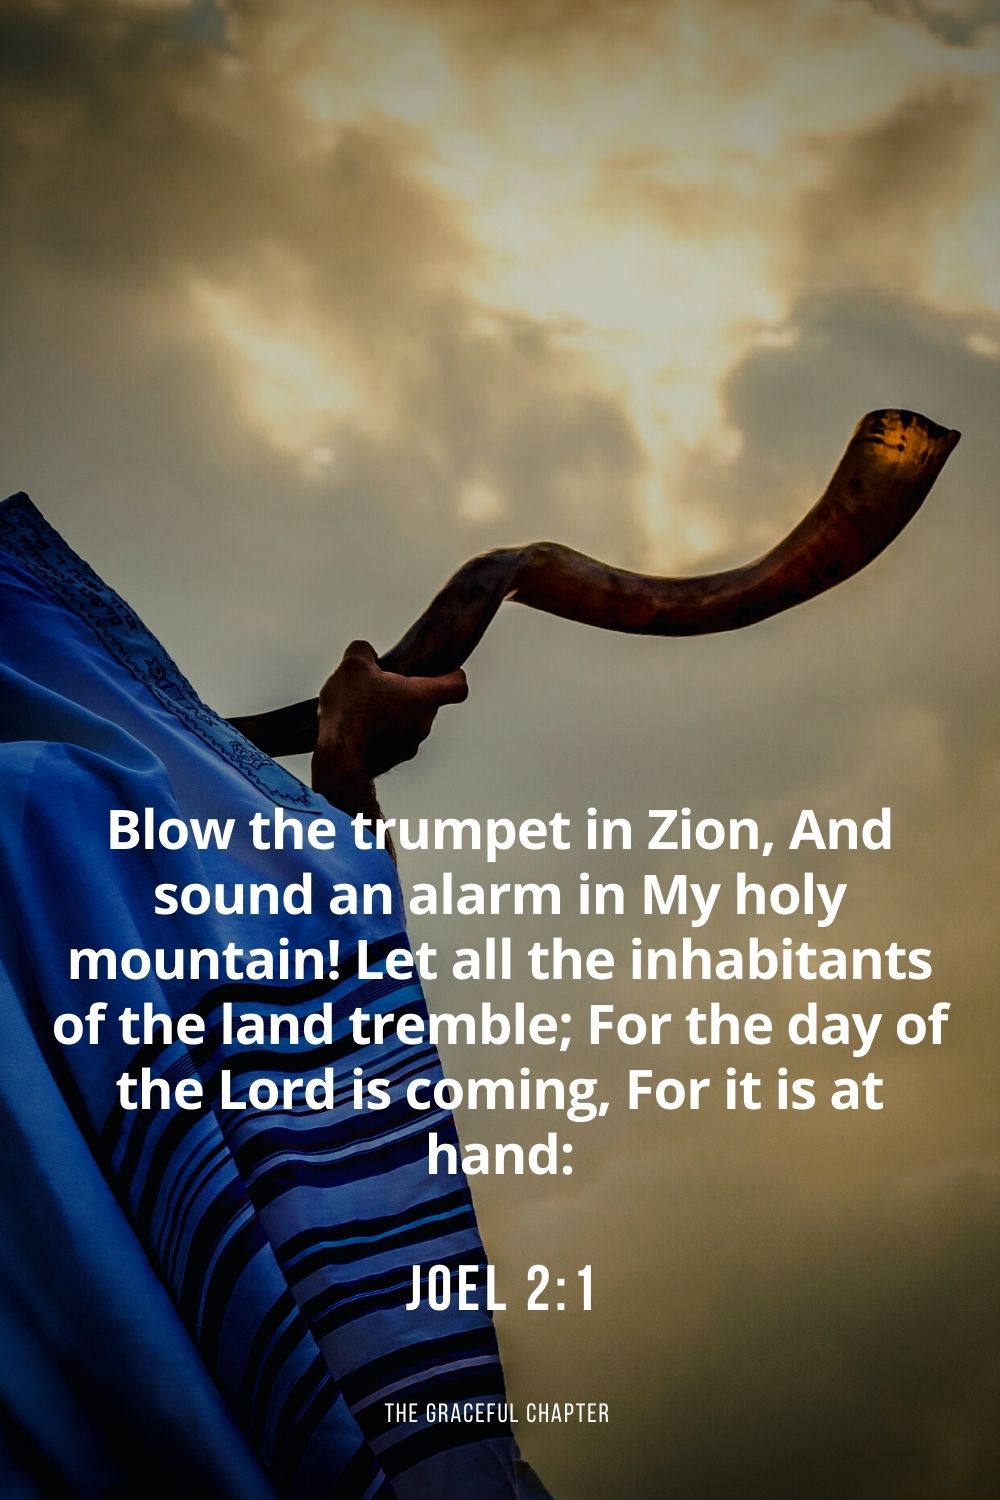 Blow the trumpet in Zion, And sound an alarm in My holy mountain! Let all the inhabitants of the land tremble; For the day of the Lord is coming, For it is at hand: Joel 2:1